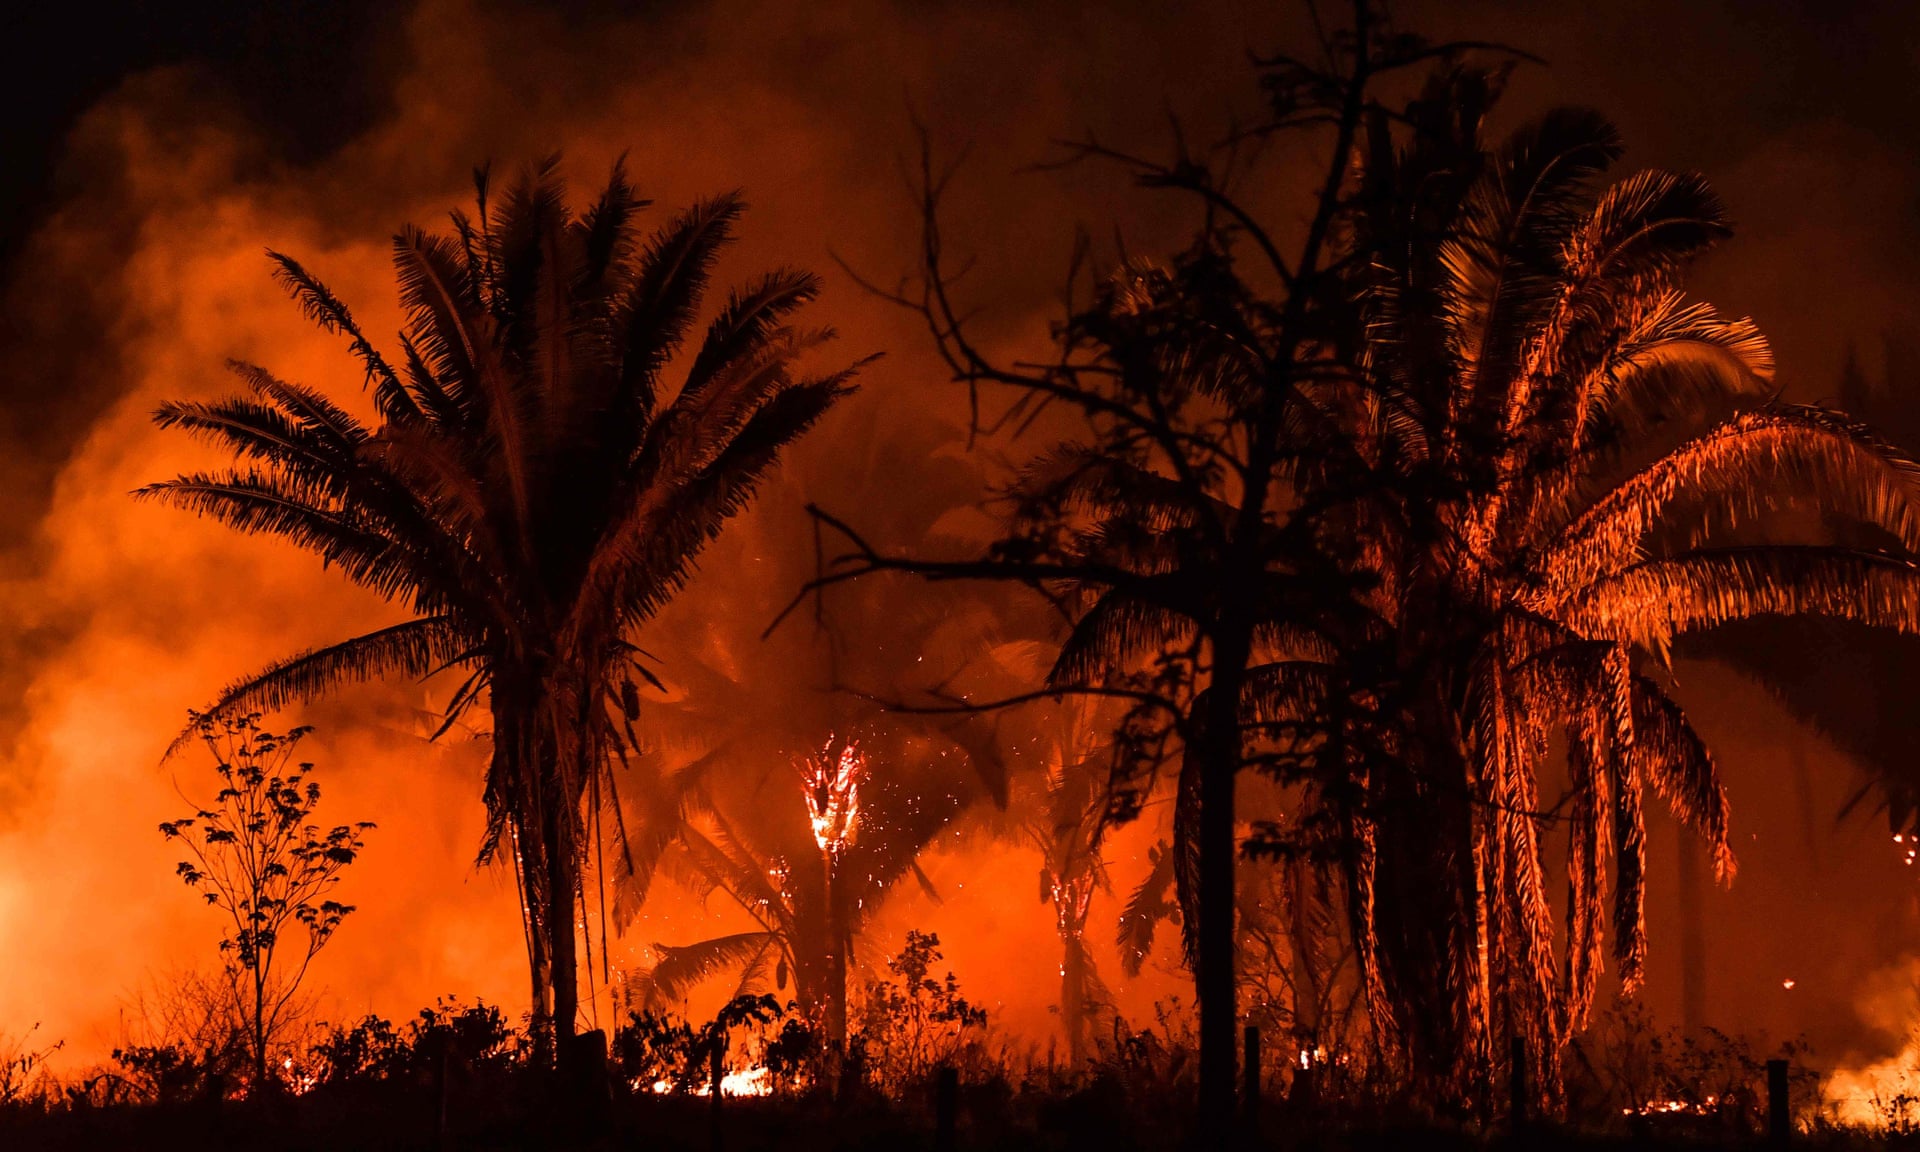 Fires burn in Pará state, Brazil, in September 2019. Jair Bolsonaro accused Leonardo DiCaprio of ‘giving money for the Amazon to be torched’. Photo: Nelson Almeida/ AFP / Getty Images